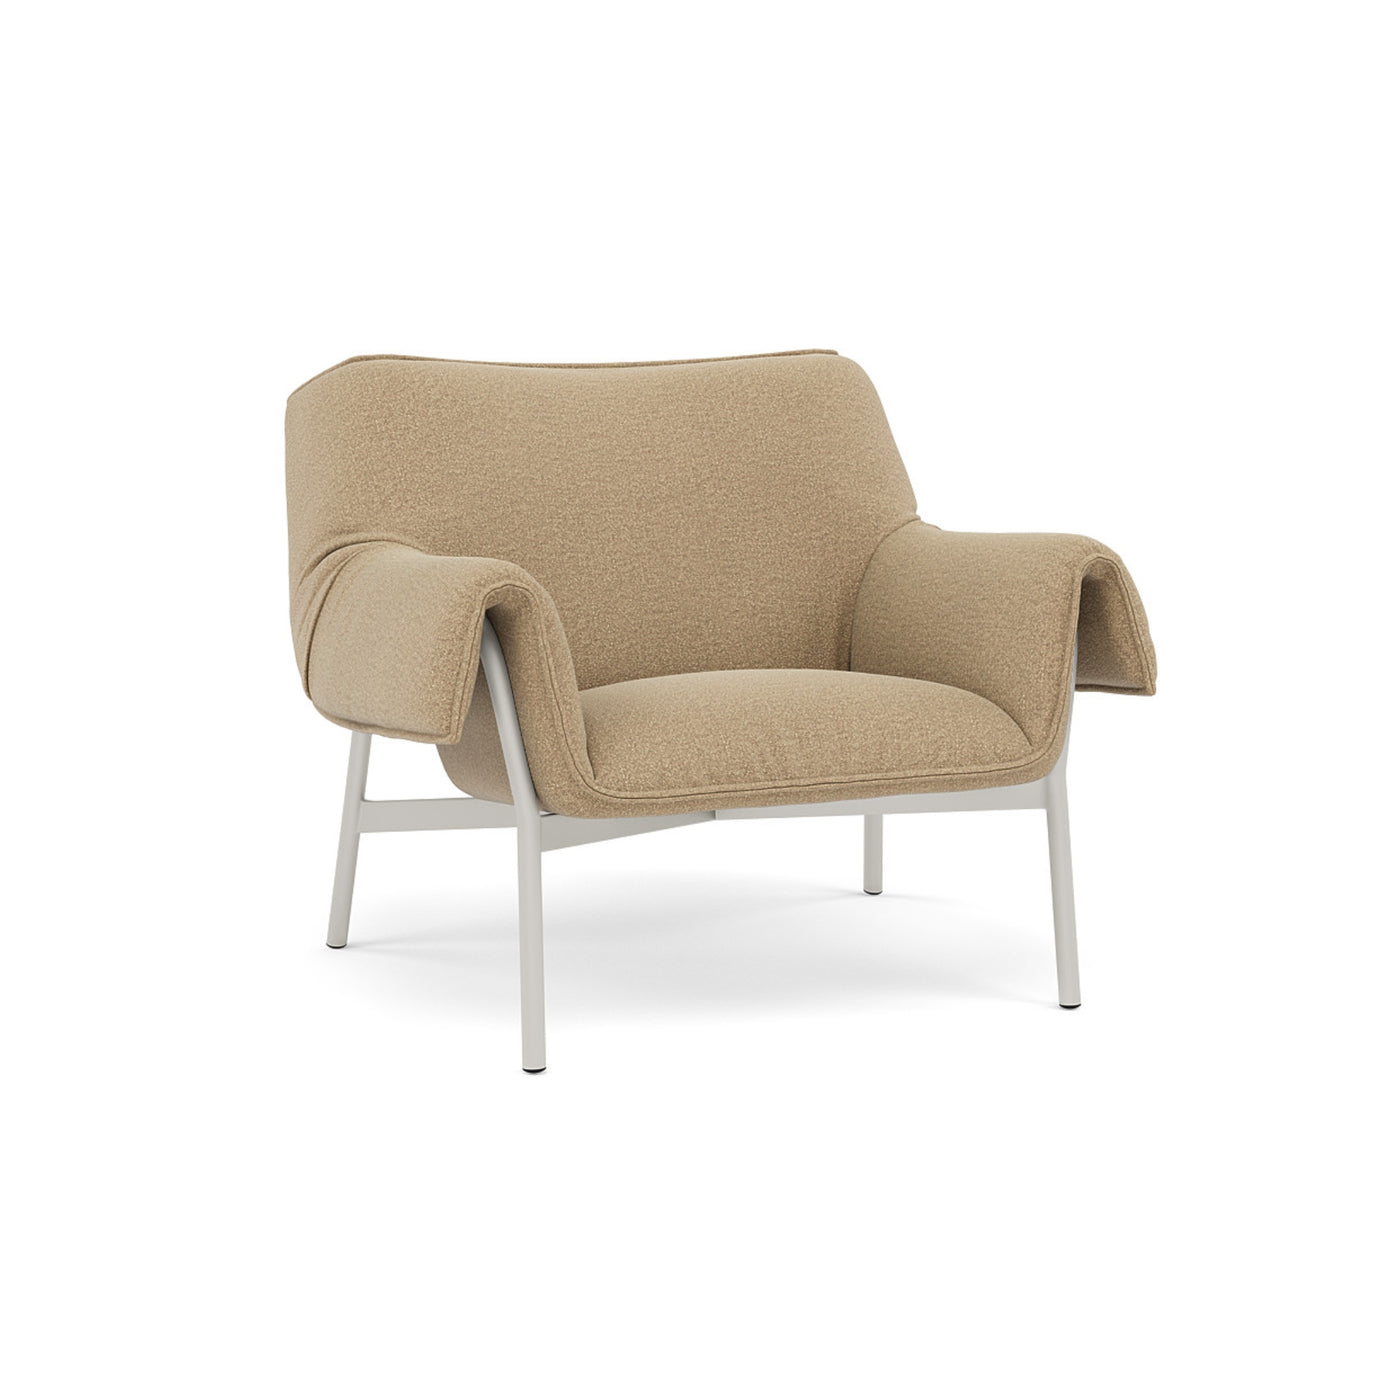 Muuto Wrap Lounge Chair. Made to order from someday designs. #colour_ecriture-240